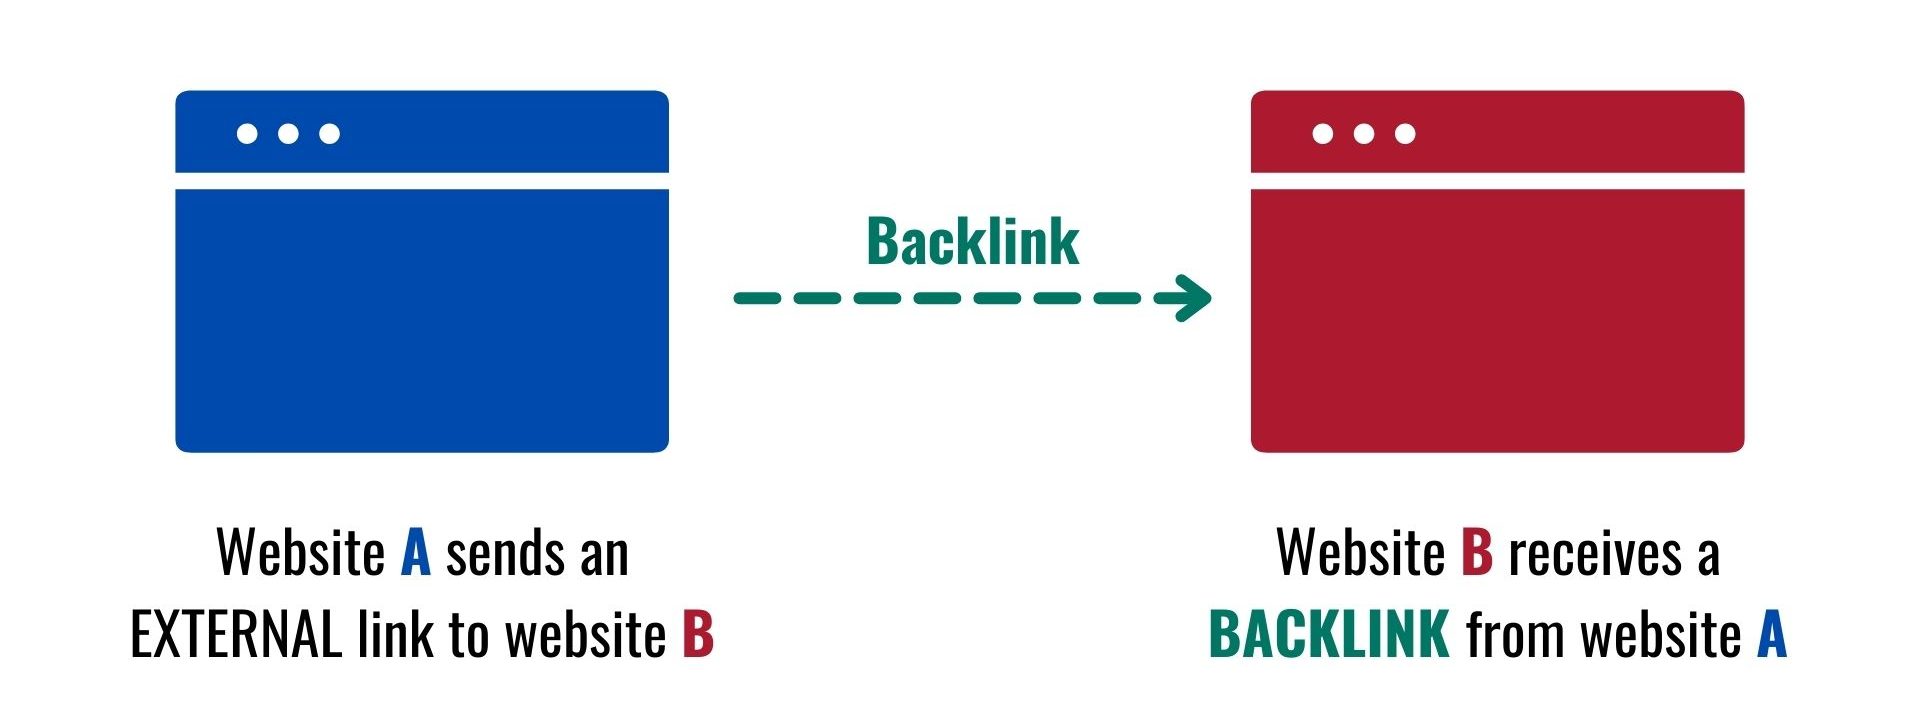 Backlinks refers to any incoming links to your website from external websites